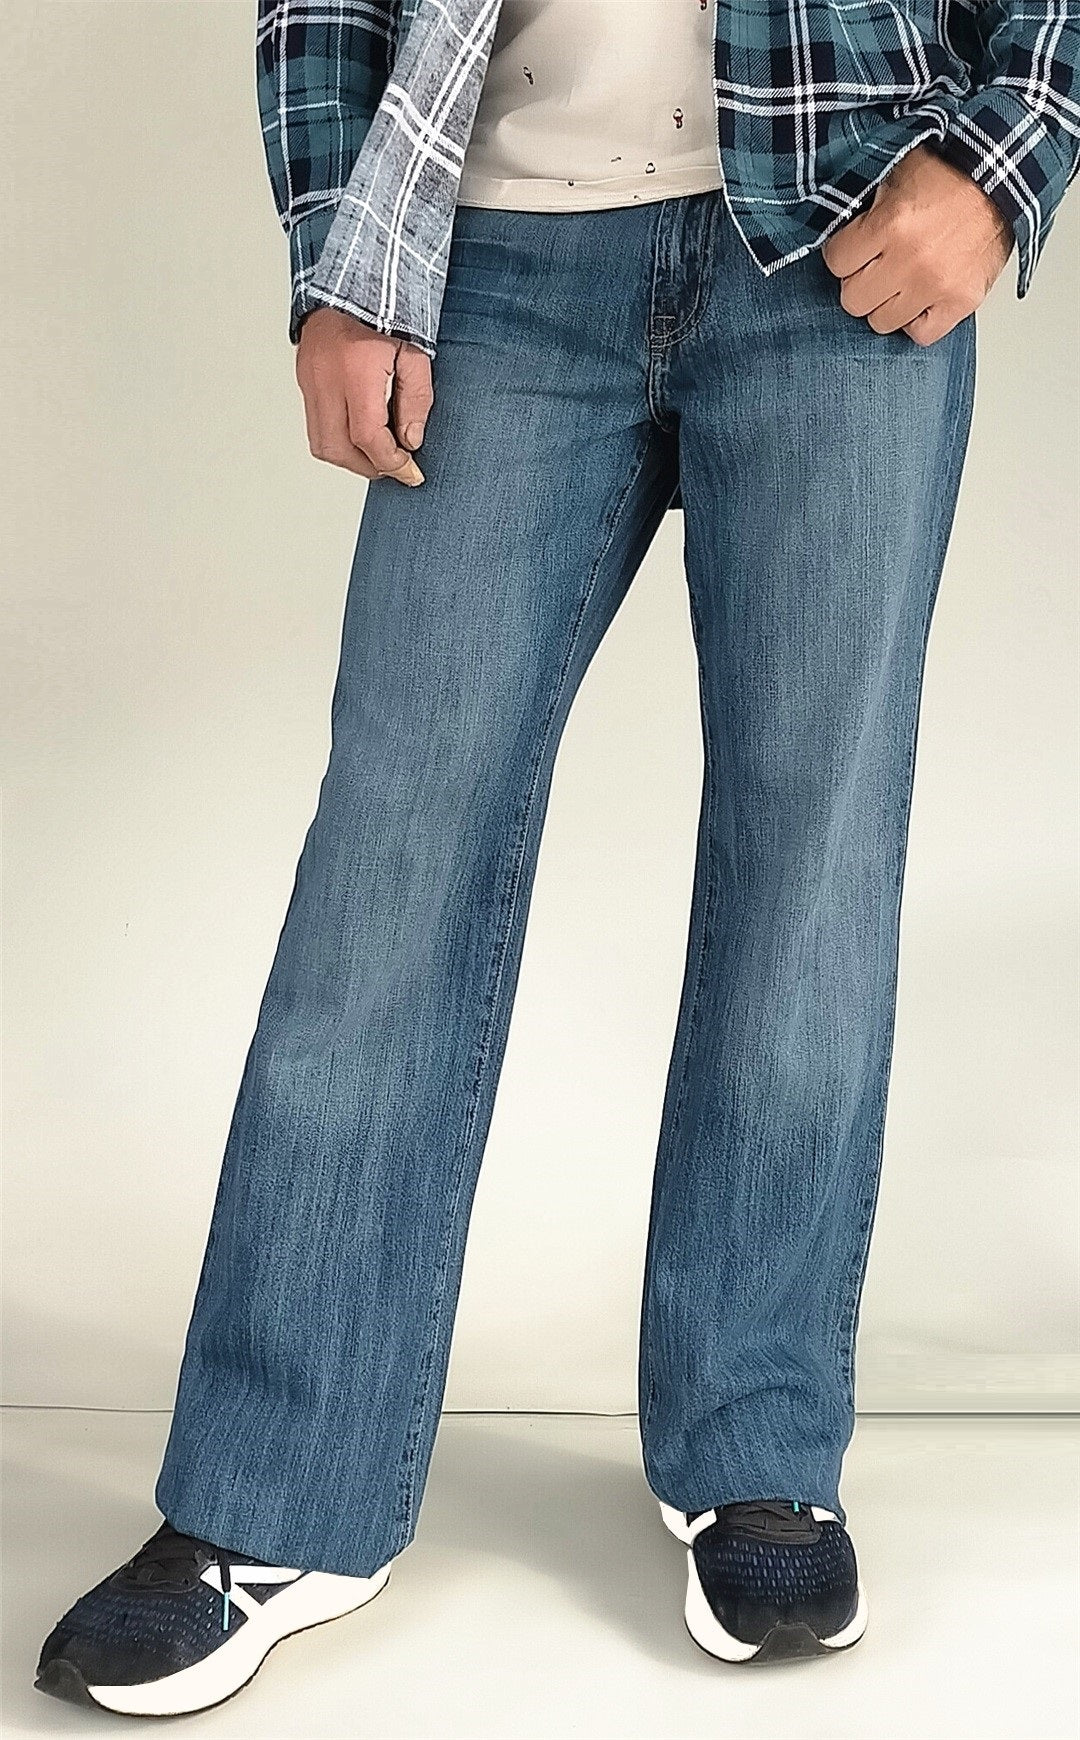 Men JEANIUS JEANS Jeffrey Relaxed Bootcut Jeans in blue - Mid rise